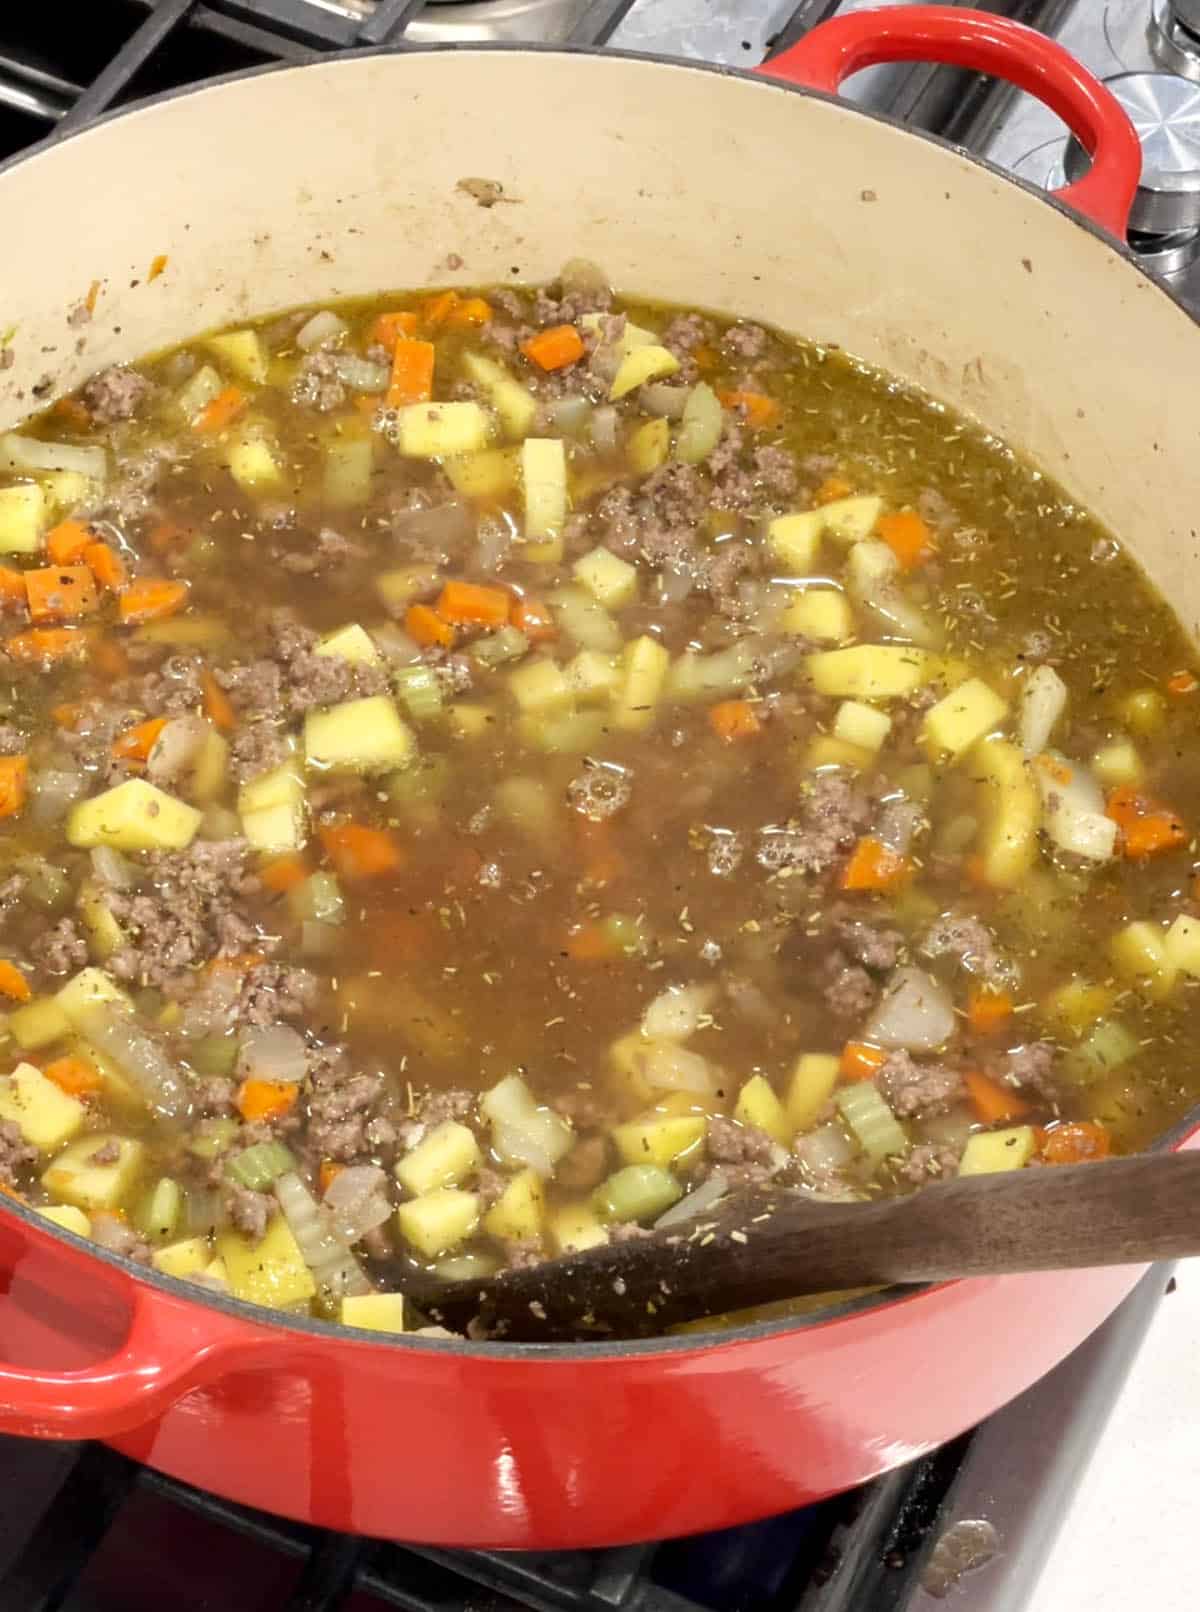 Veggies and grond beef simmering in a beef stock in a large Dutch Oven.